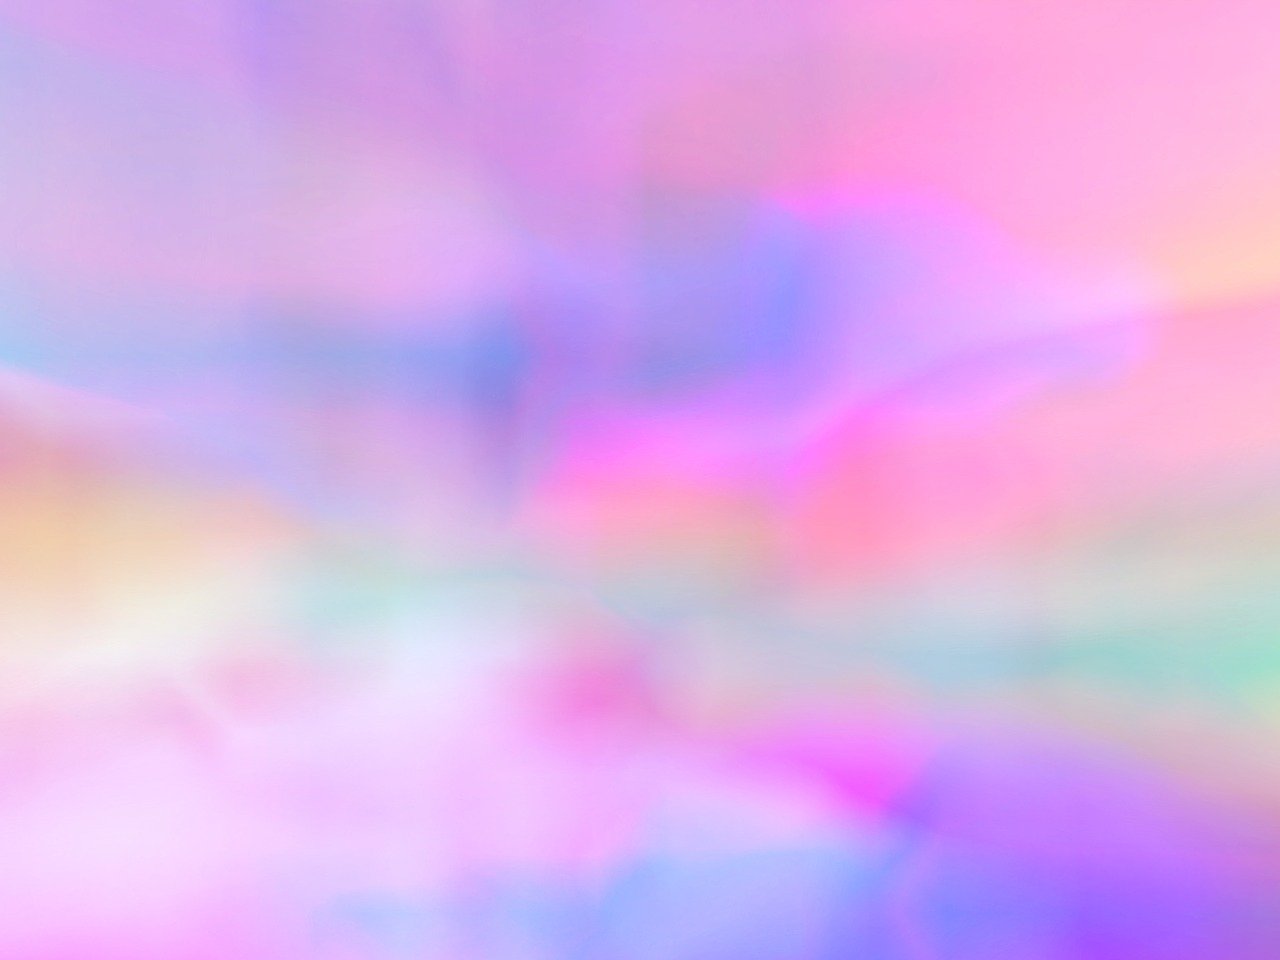 a blurry image of a pink and blue flower, inspired by Yanjun Cheng, color field, holographic rainbow, blurred and dreamy illustration, iphone background, mother of pearl iridescent